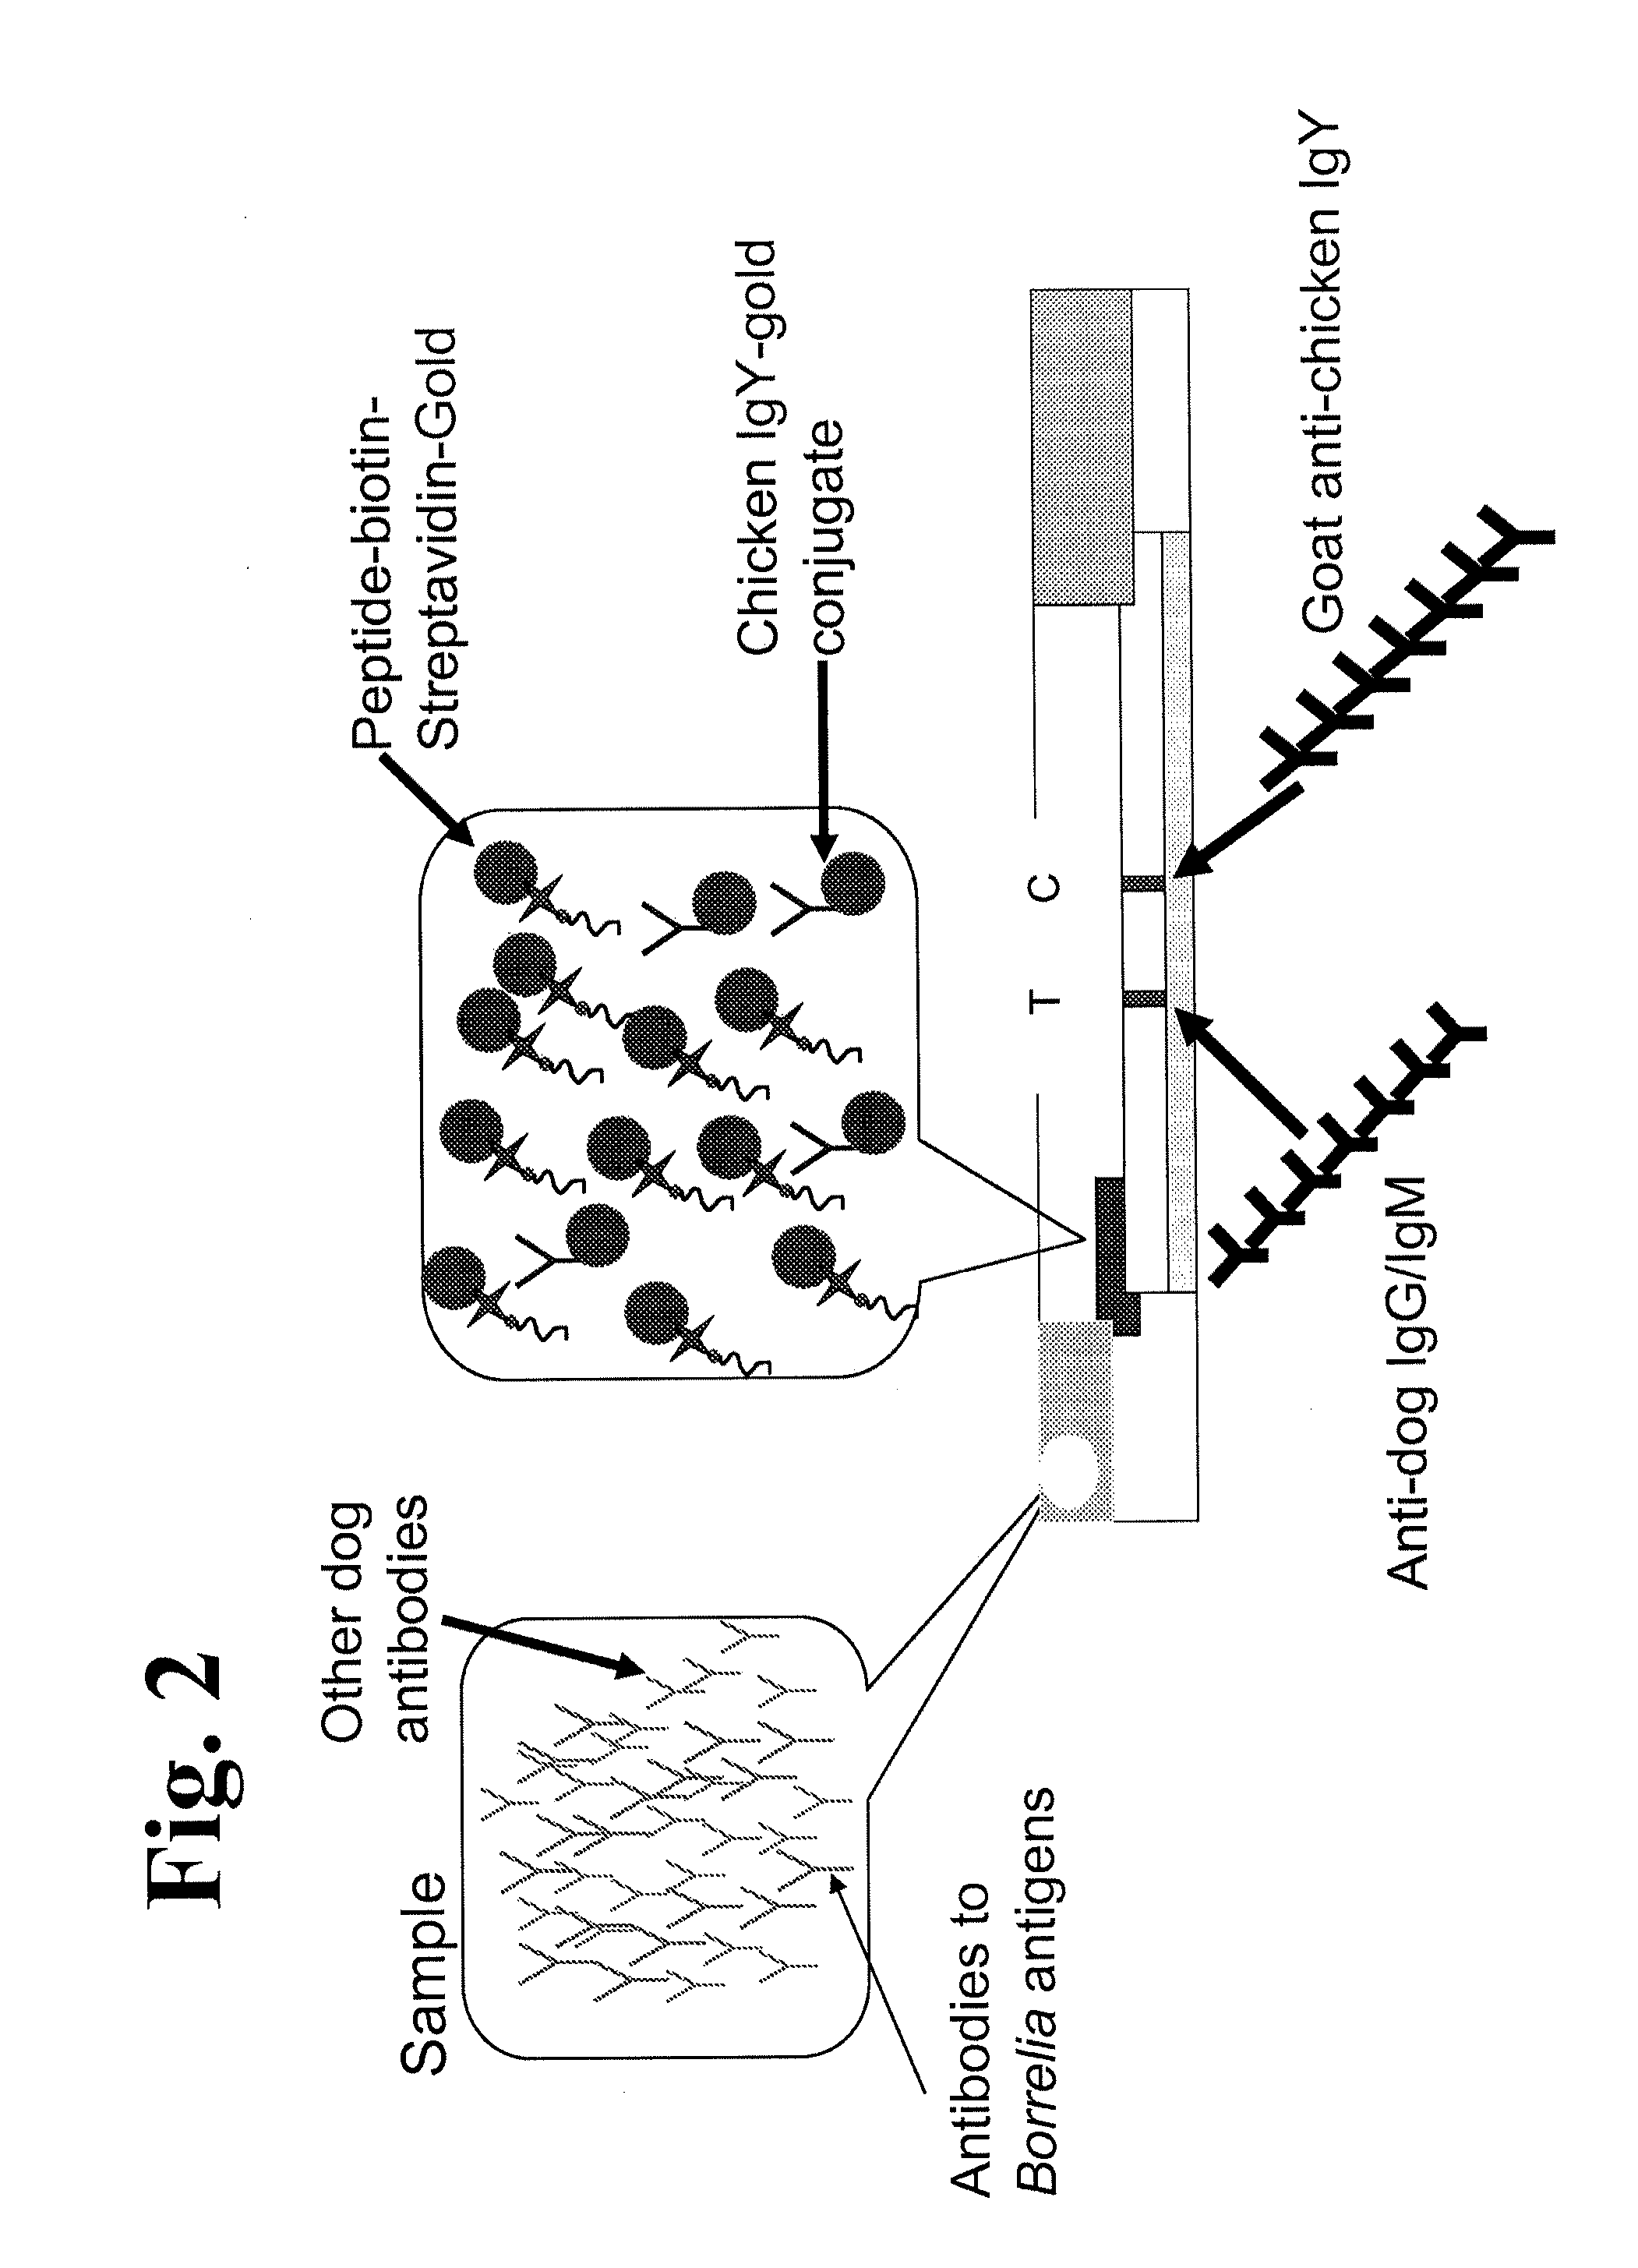 Peptides and methods for the detection of lyme disease antibodies